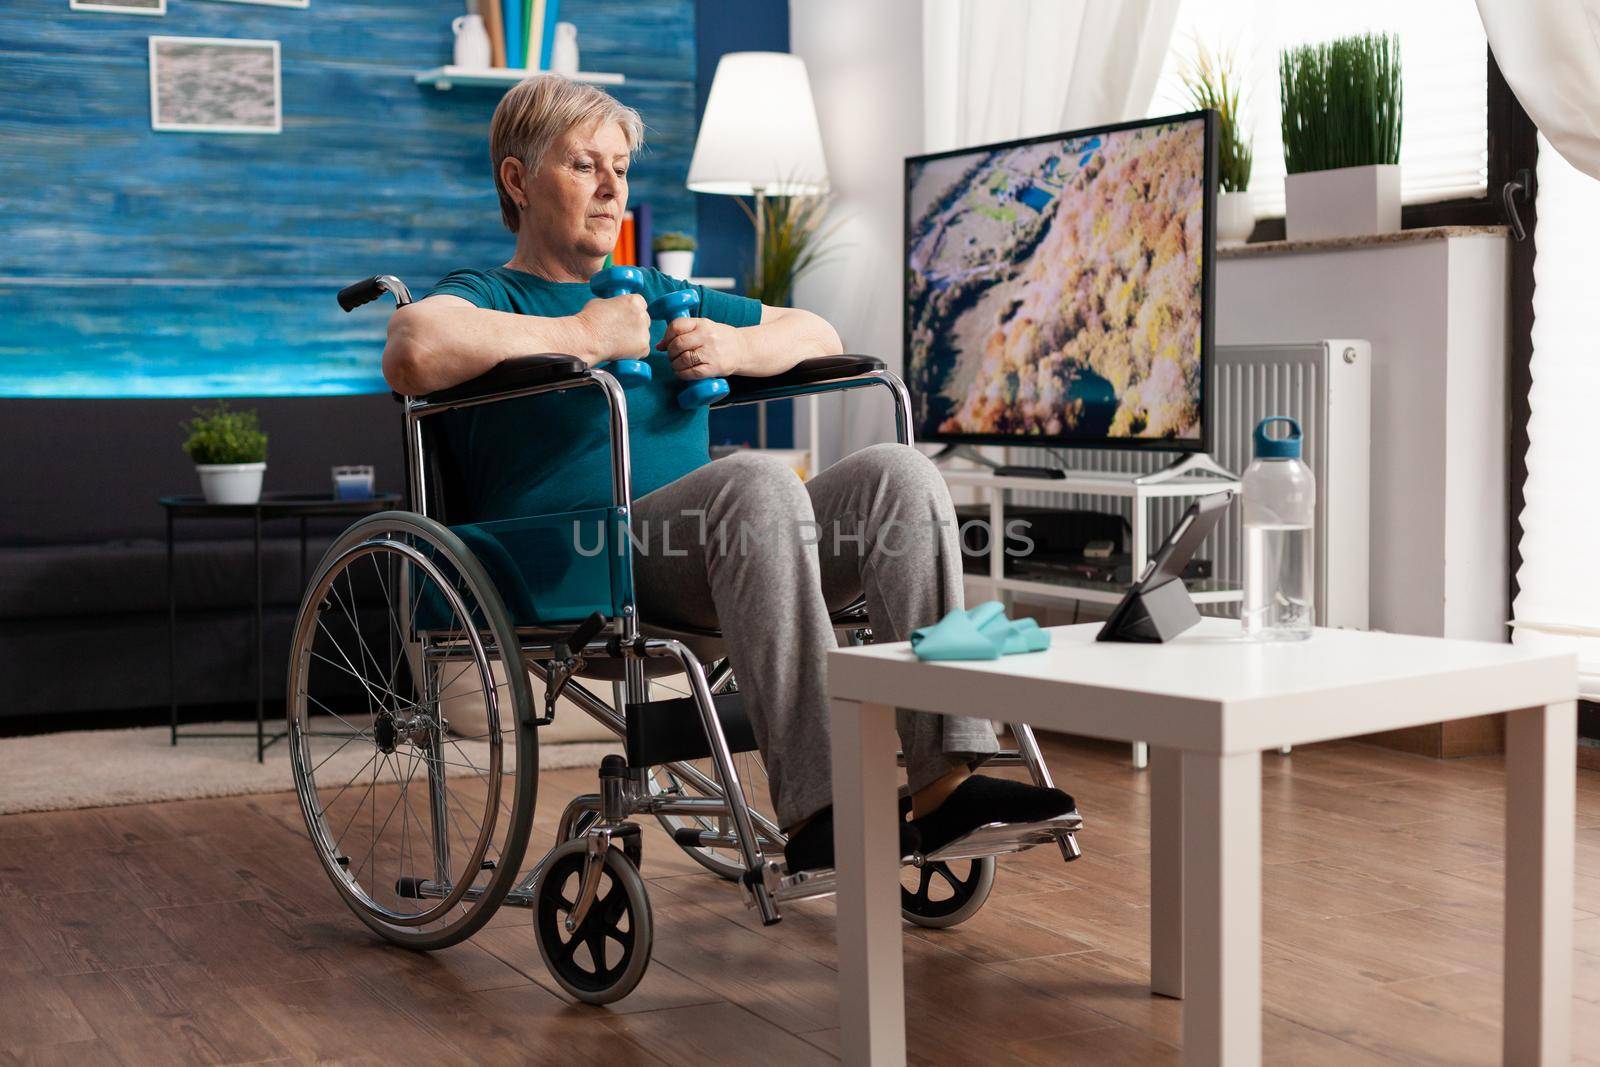 Invalid senior woman in wheelchair training body muscles using gymnastic dumbbells recovery after paralysis. Focused disability pensioner watching gym workout exercise on tablet exercising resistance